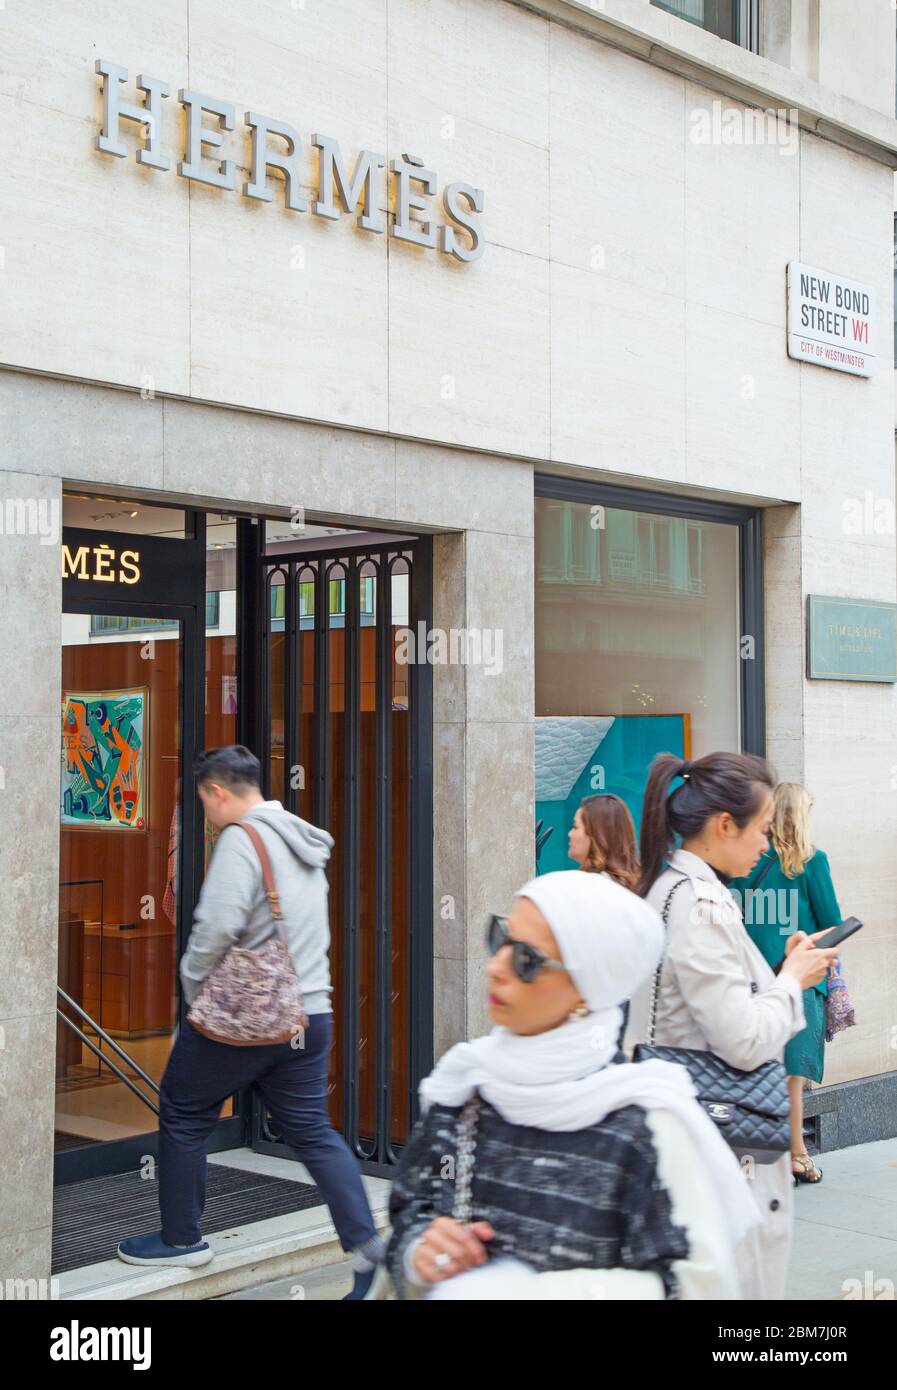 Smart-looking international shoppers, one of them Asian, walking past the Hermes luxury brand store on Bond Street in the West End of London, UK Stock Photo